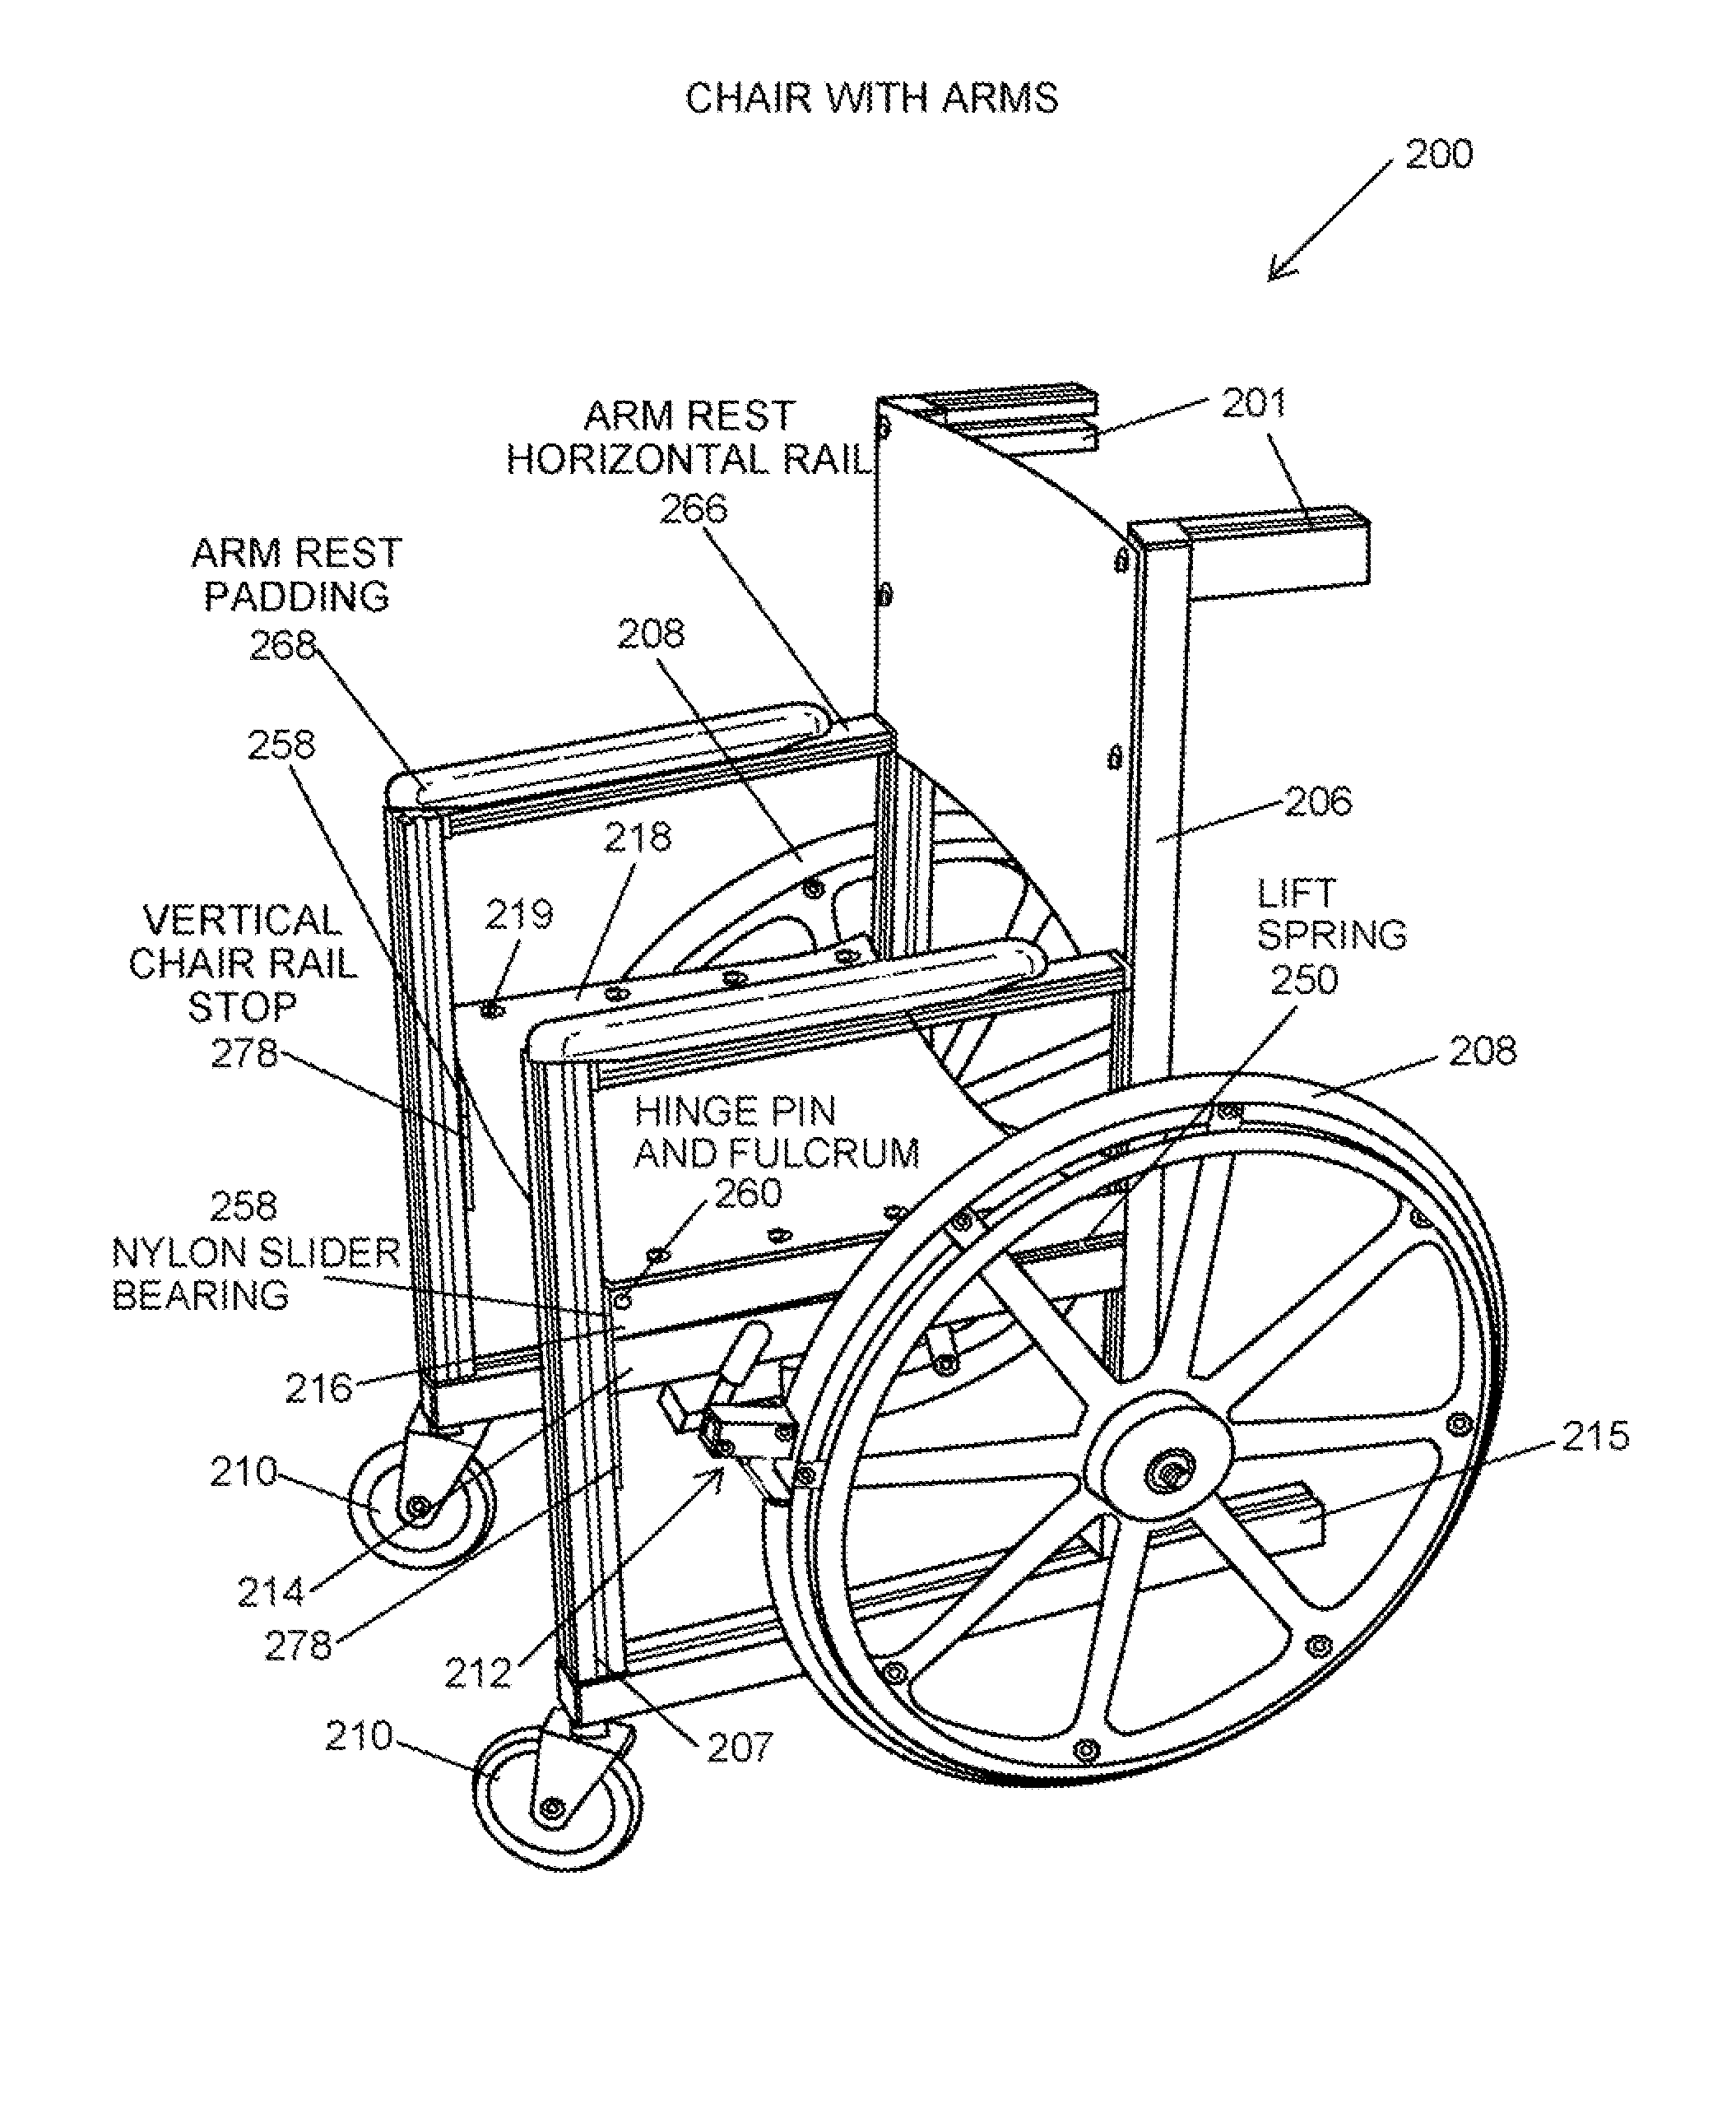 Structure, Components and Method for Constructing and Operating an Automatically self locking manually propelled vehicle such as a wheel chair